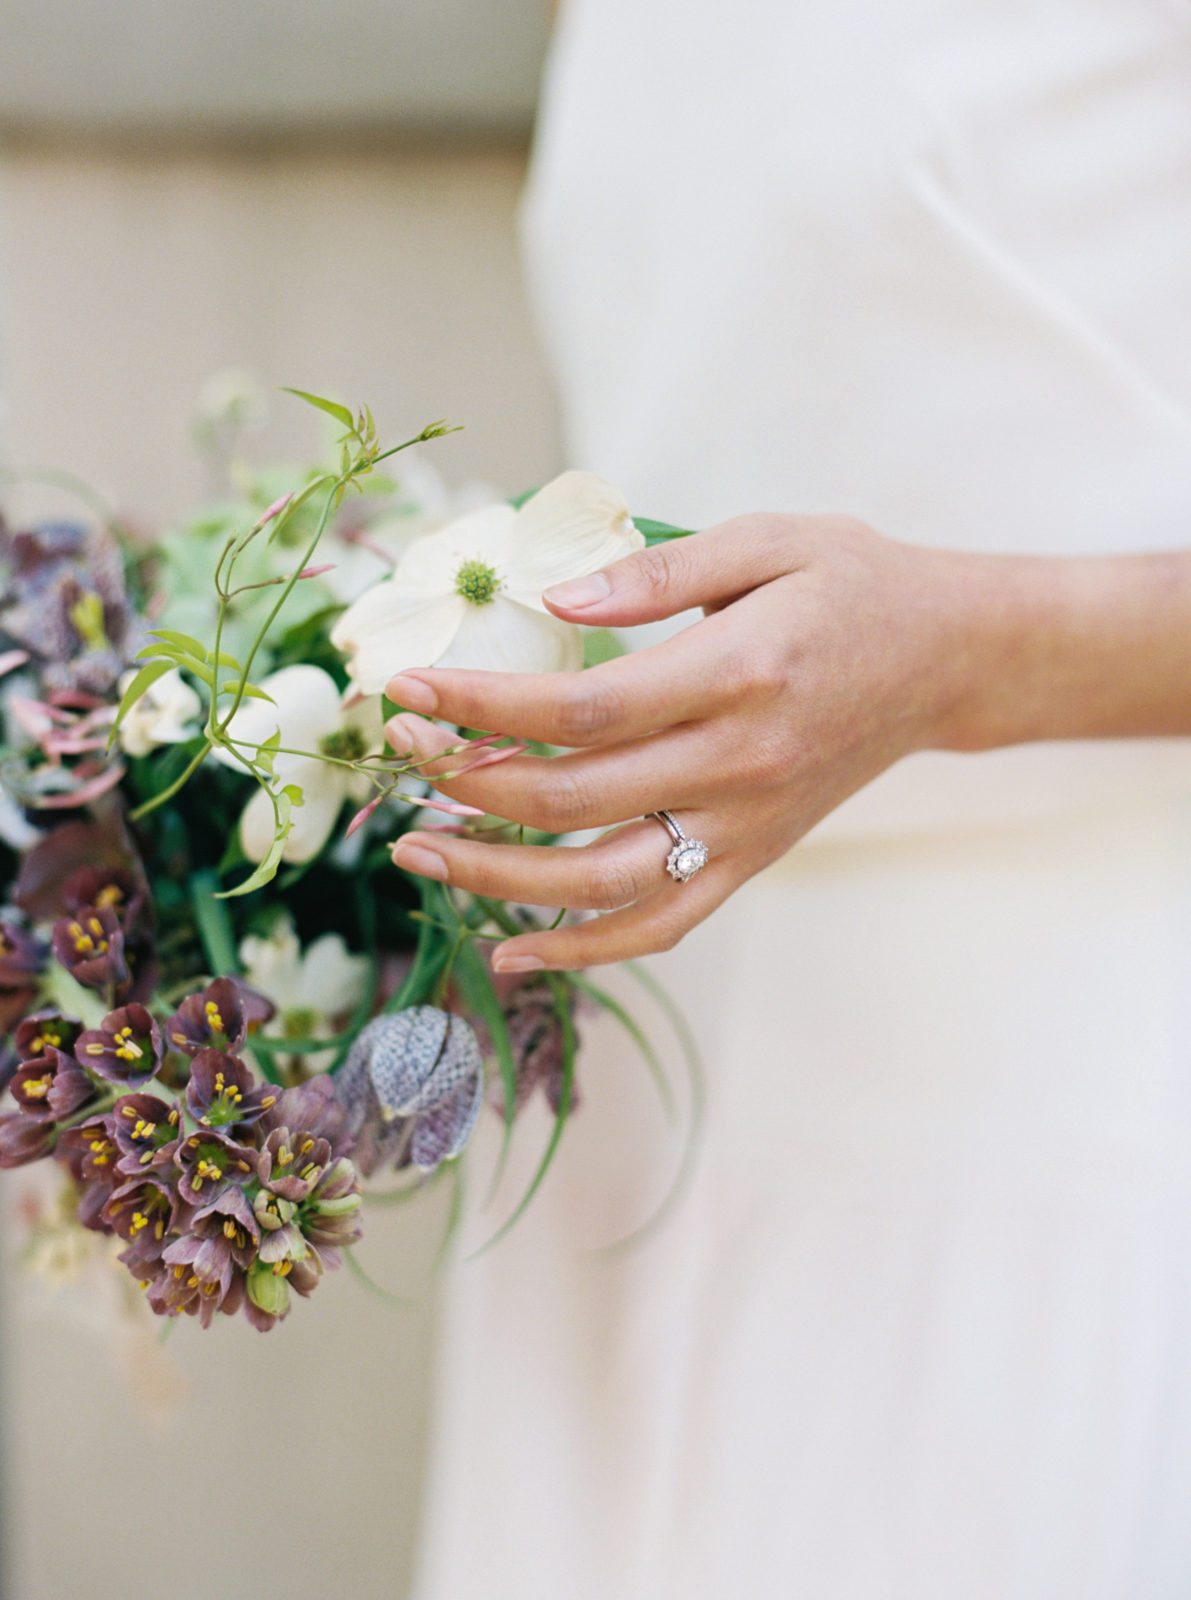 Bride gently holds a flower from her bouquet to show off her ring during her old world-inspired elopement.